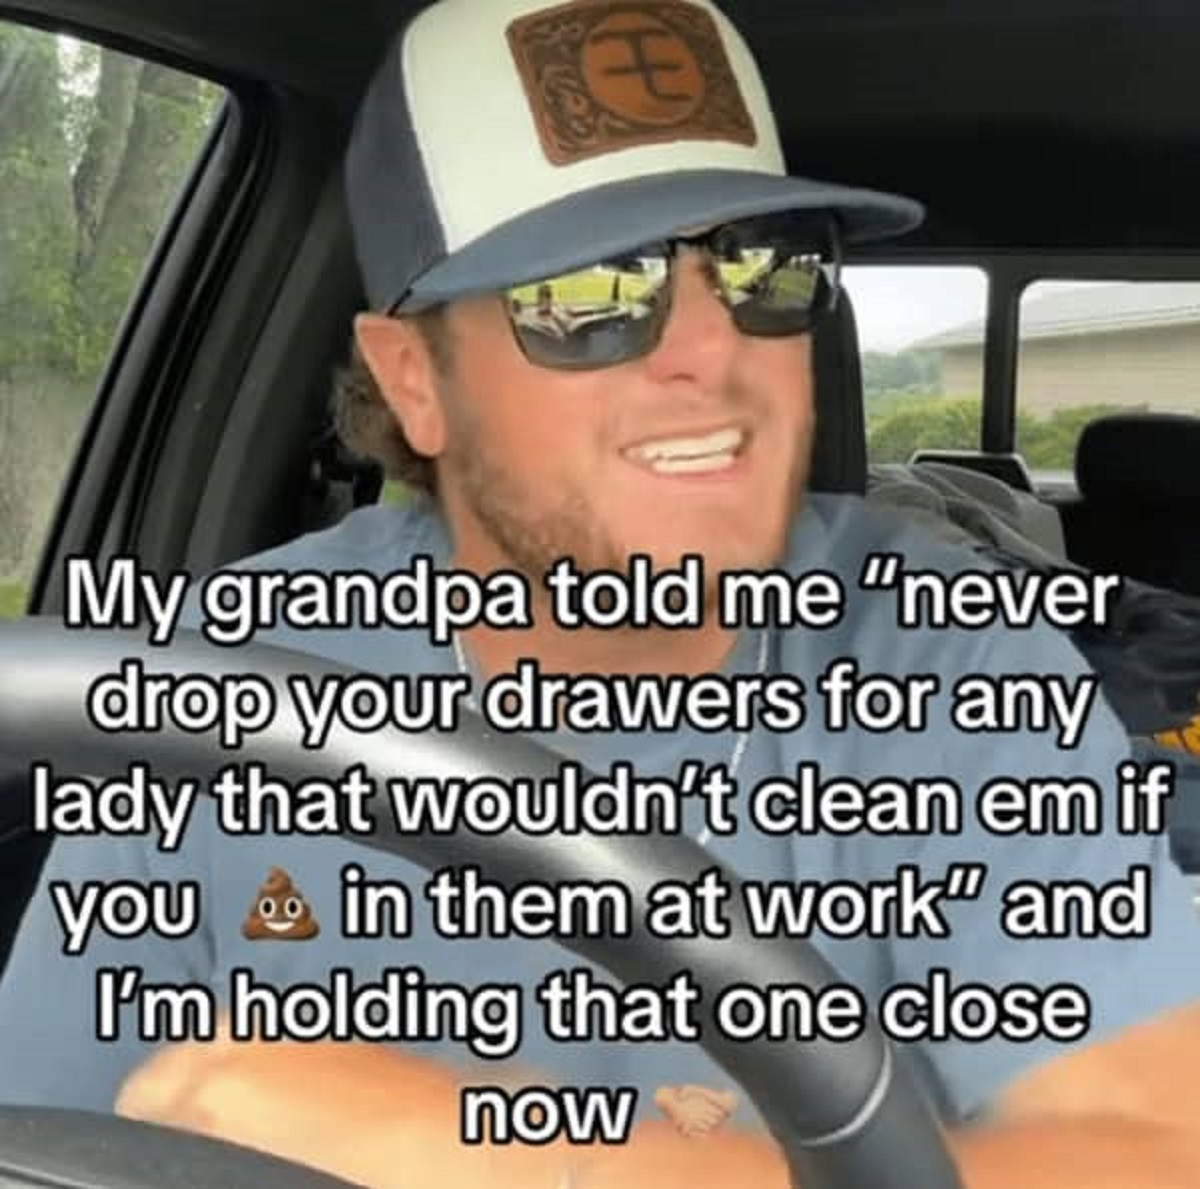 photo caption - H My grandpa told me "never drop your drawers for any lady that wouldn't clean em if in them at work" and you I'm holding that one close now